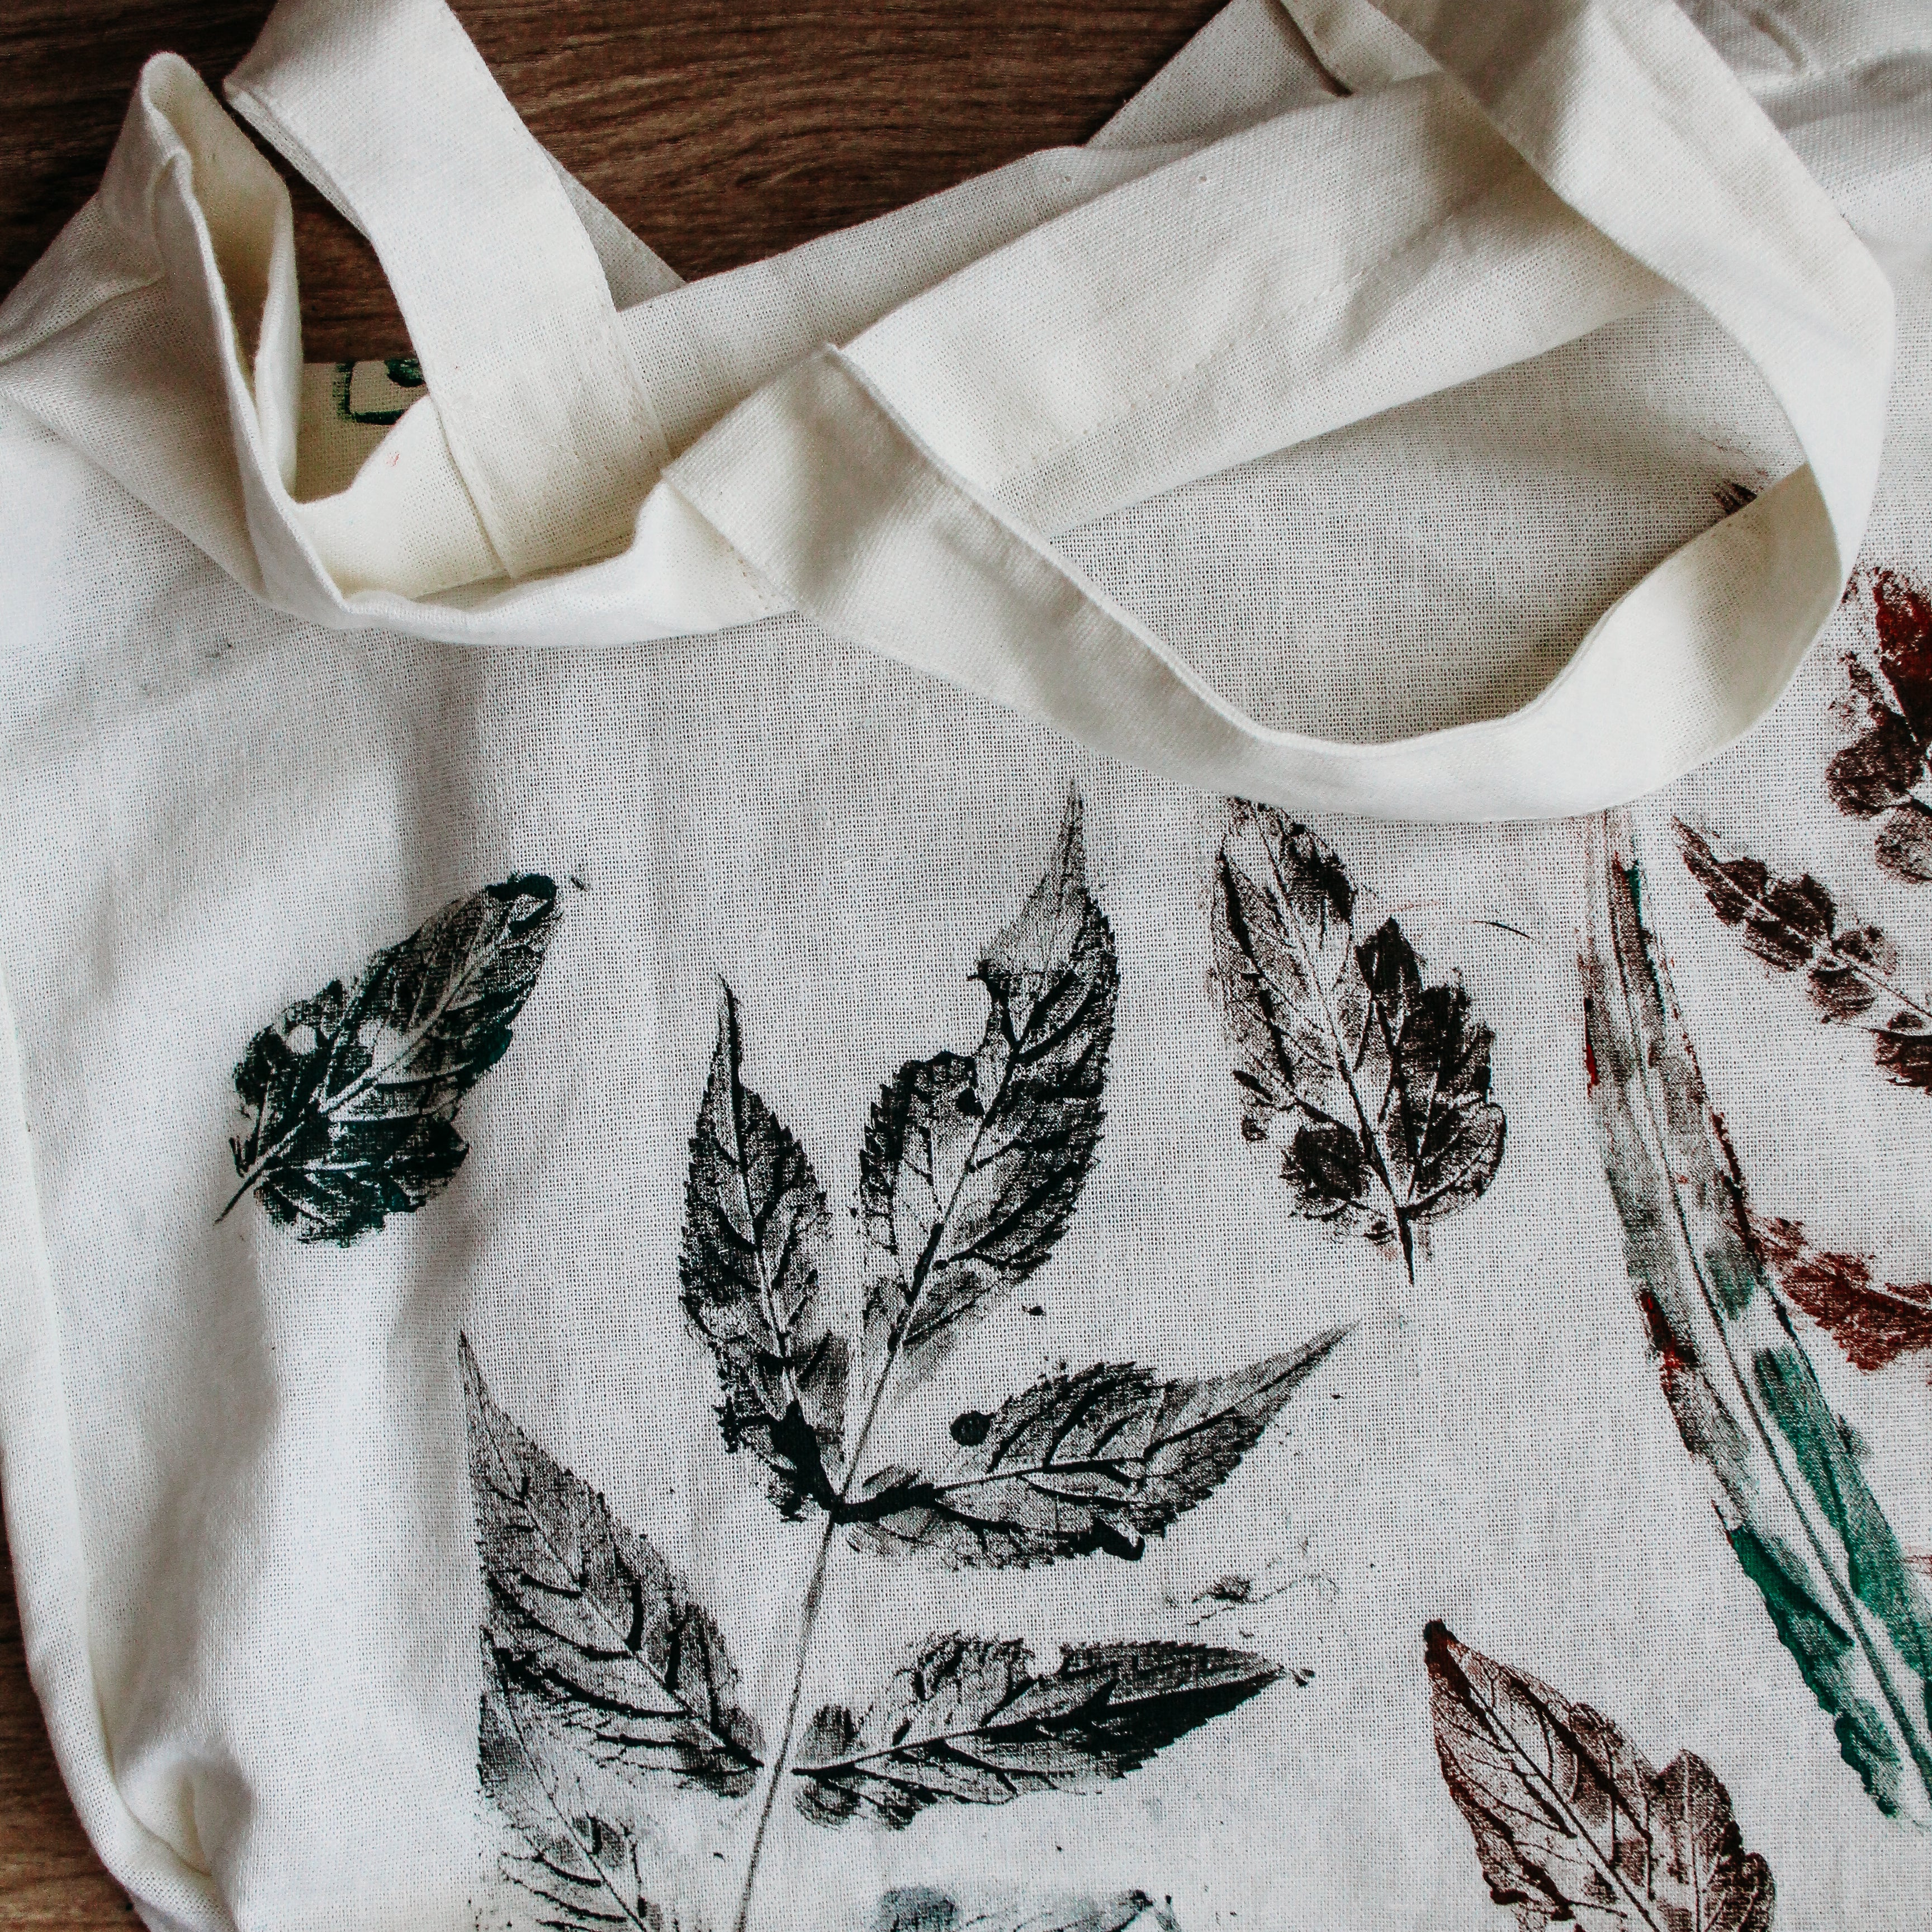 A canvas bag sits on a table covered in leaf prints.